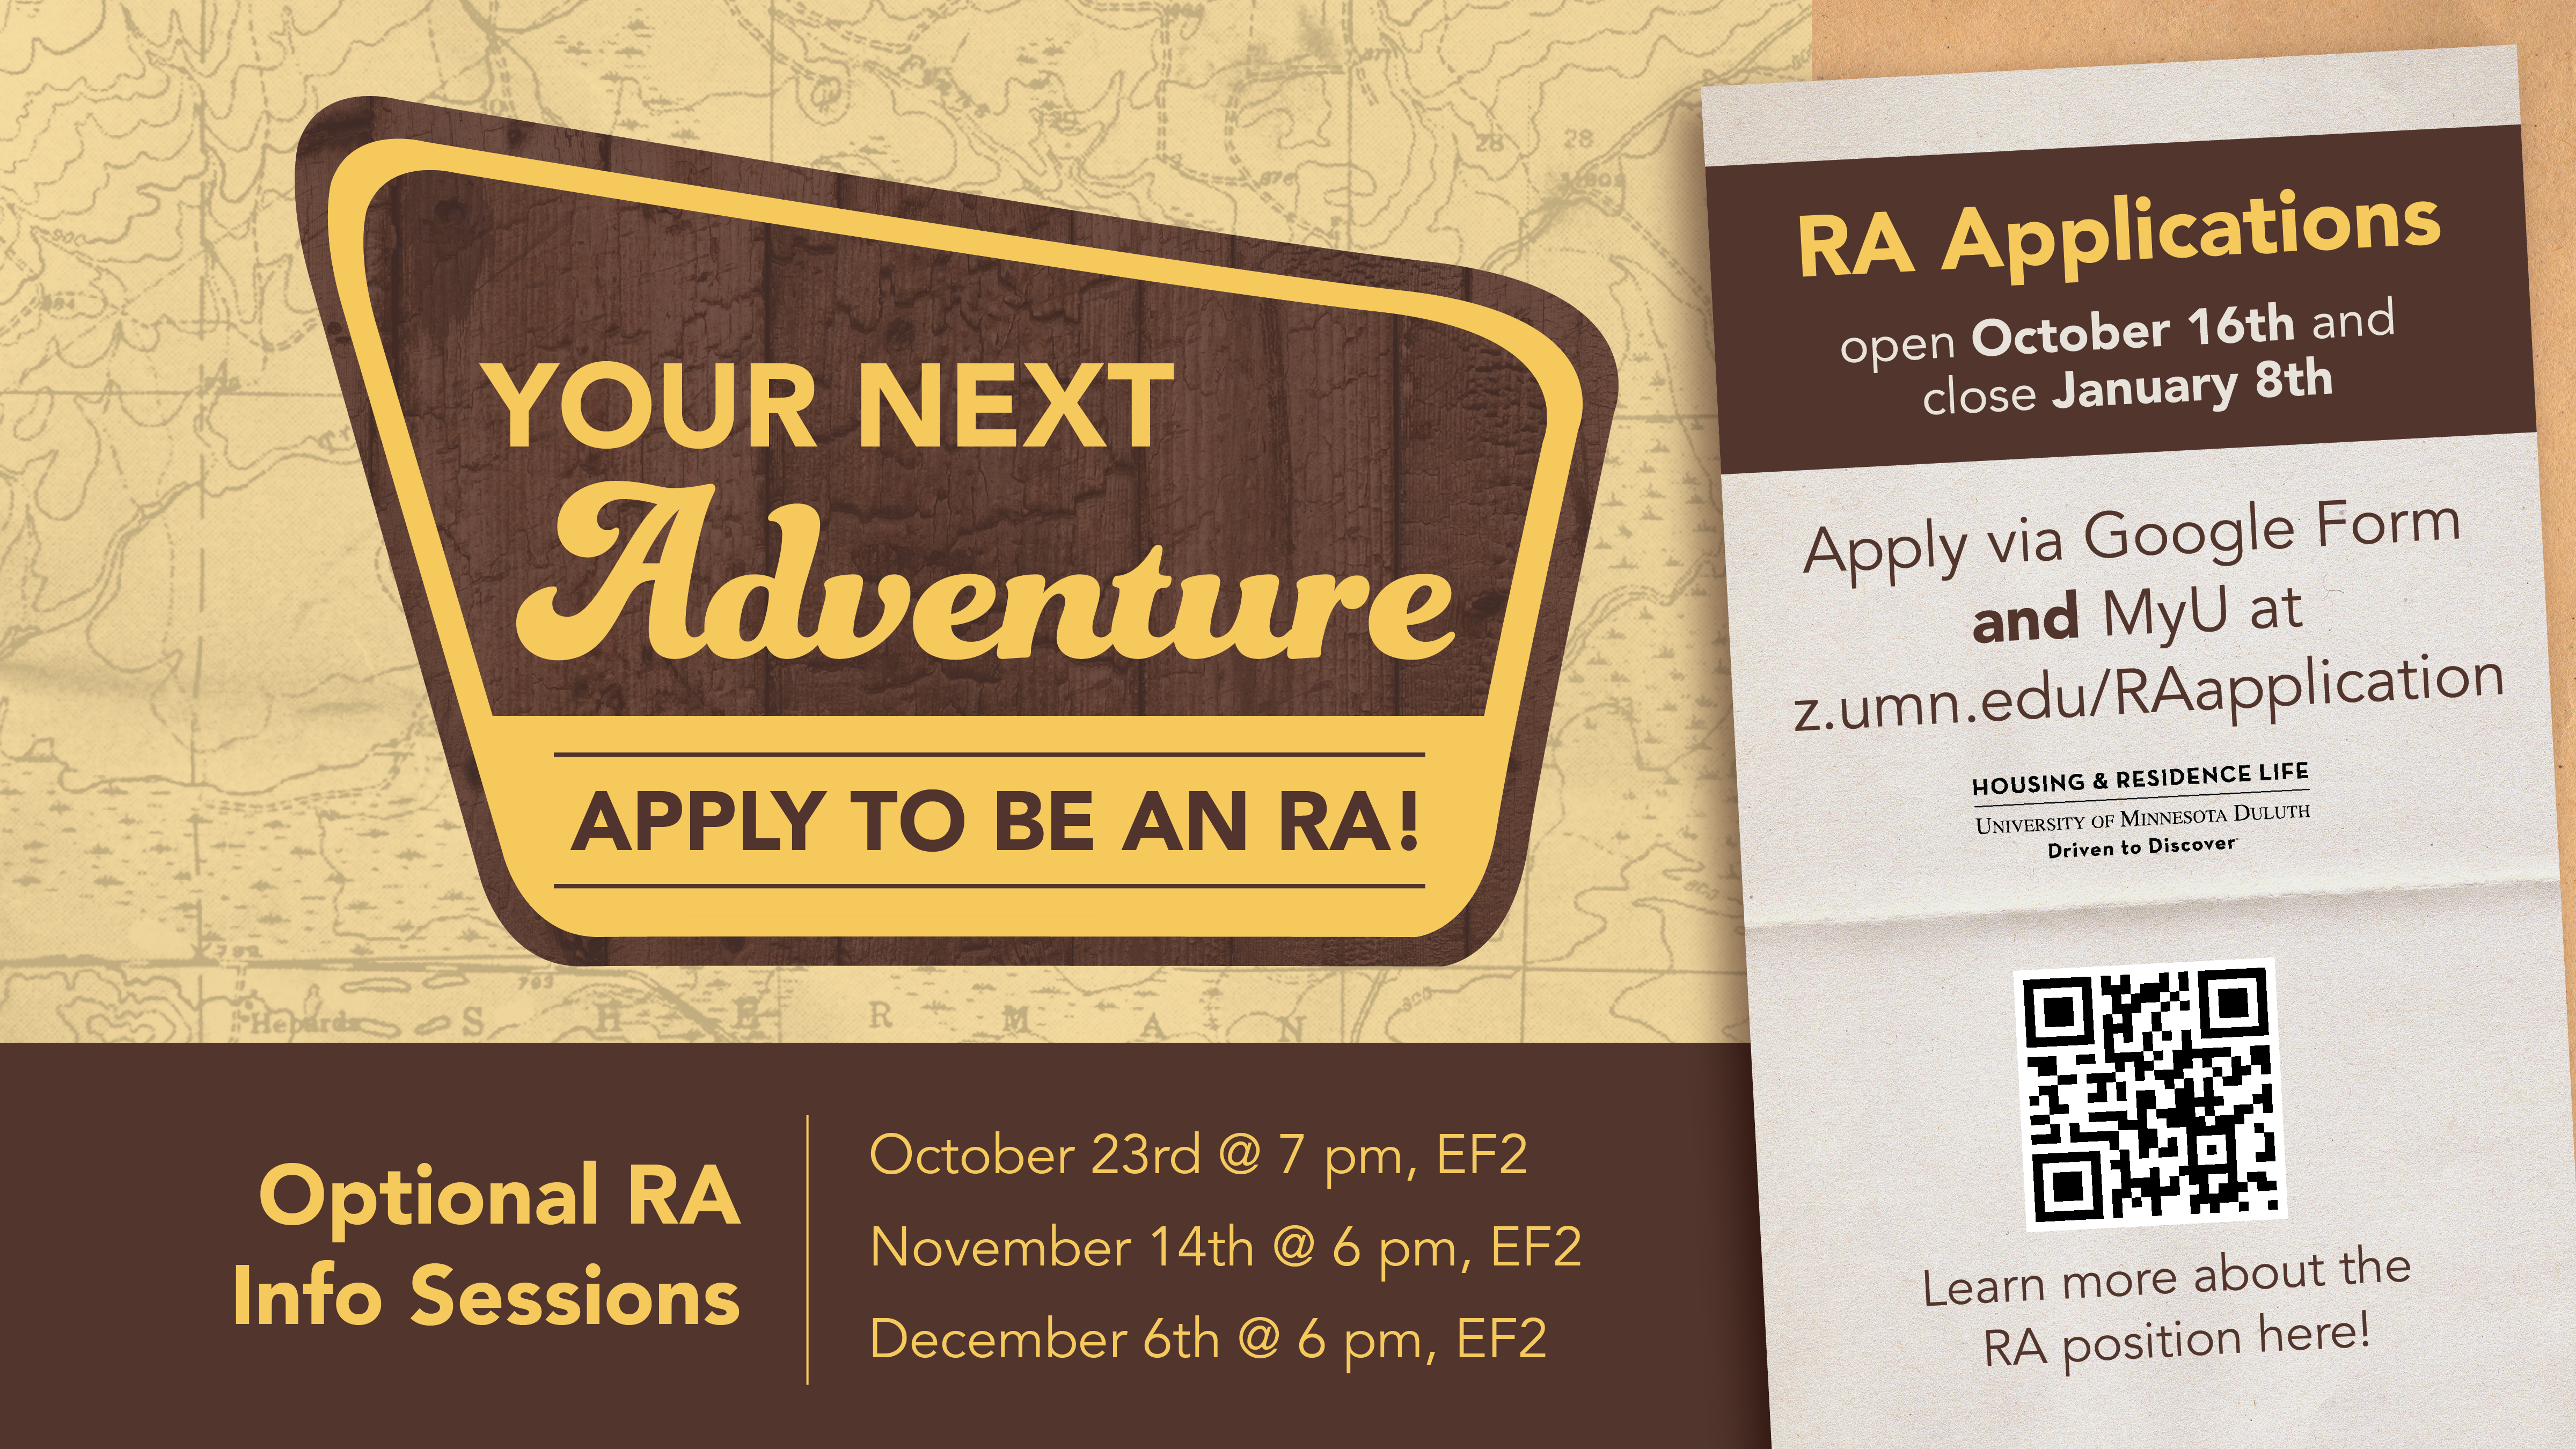 Image of the RA recruitment poster